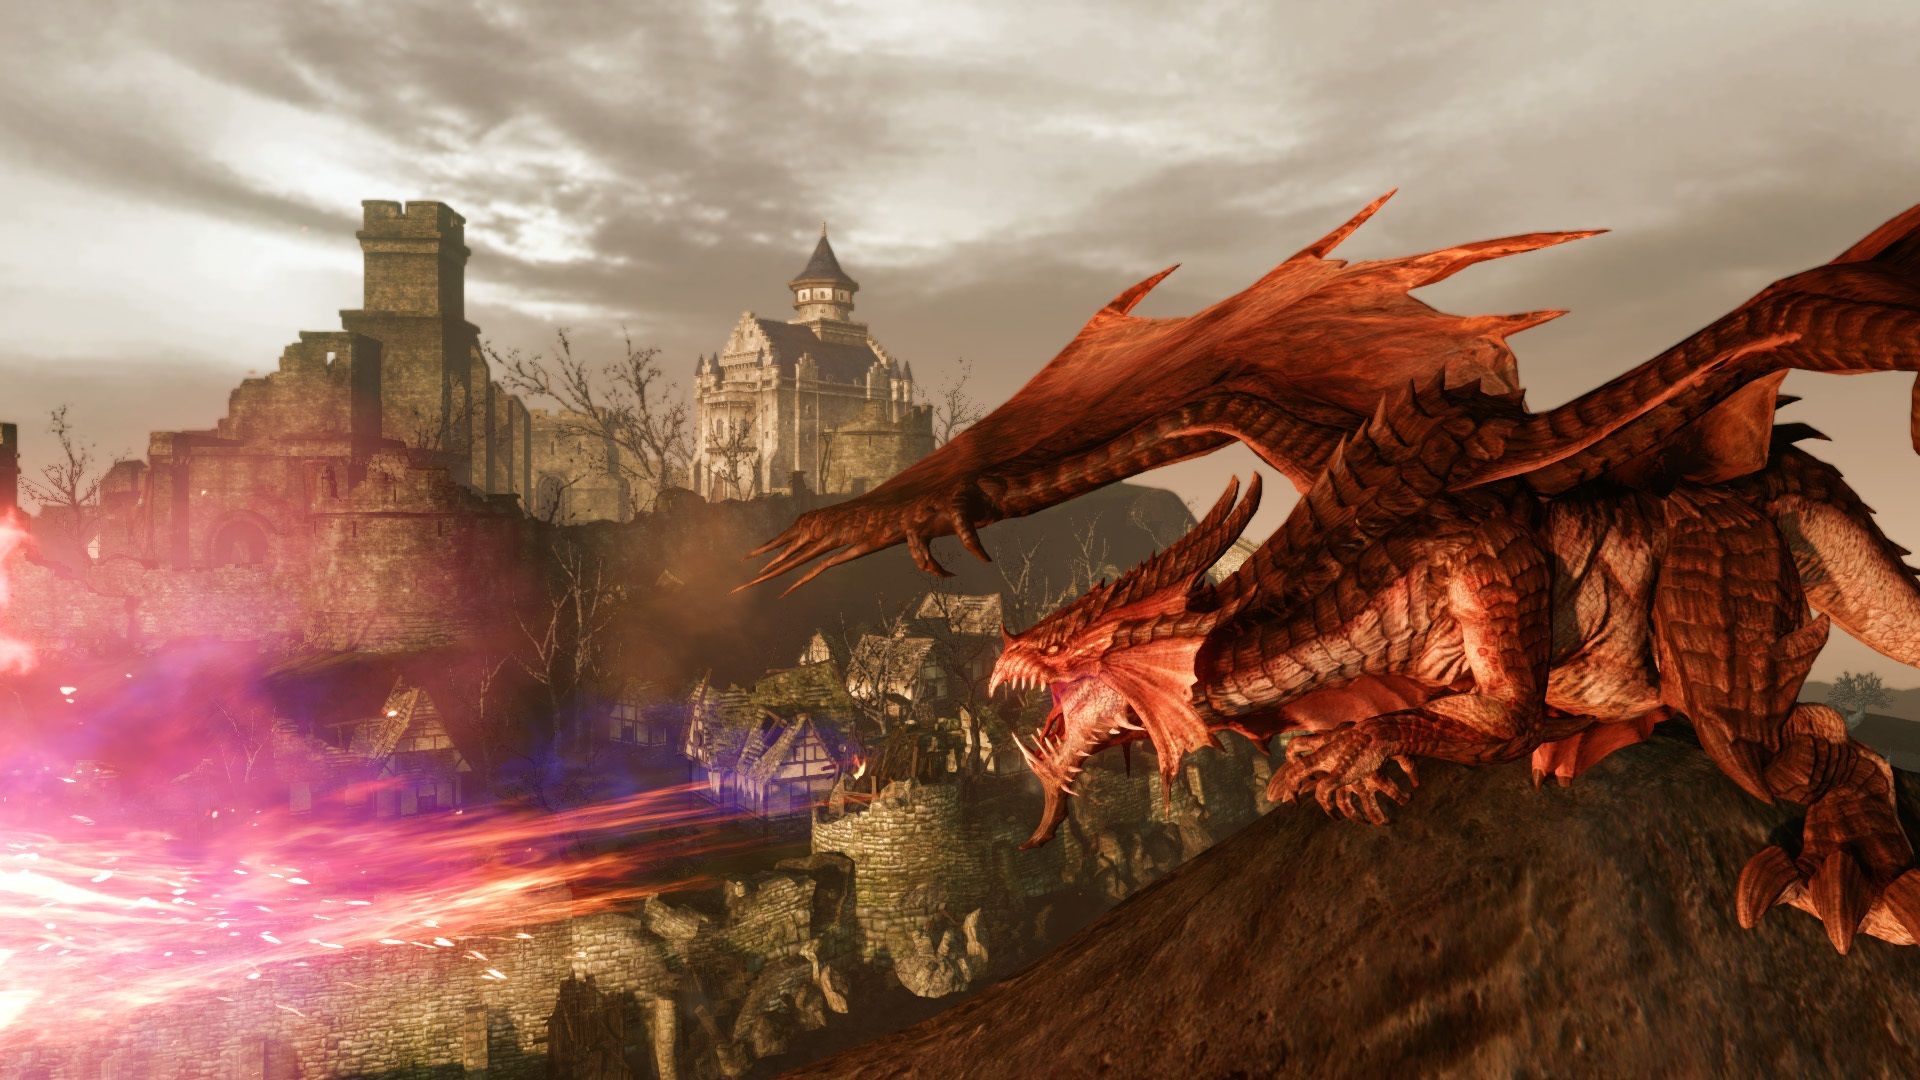 Best free PC games: Archeage. Image shows a dragon looking down on a settlement from on a hill.